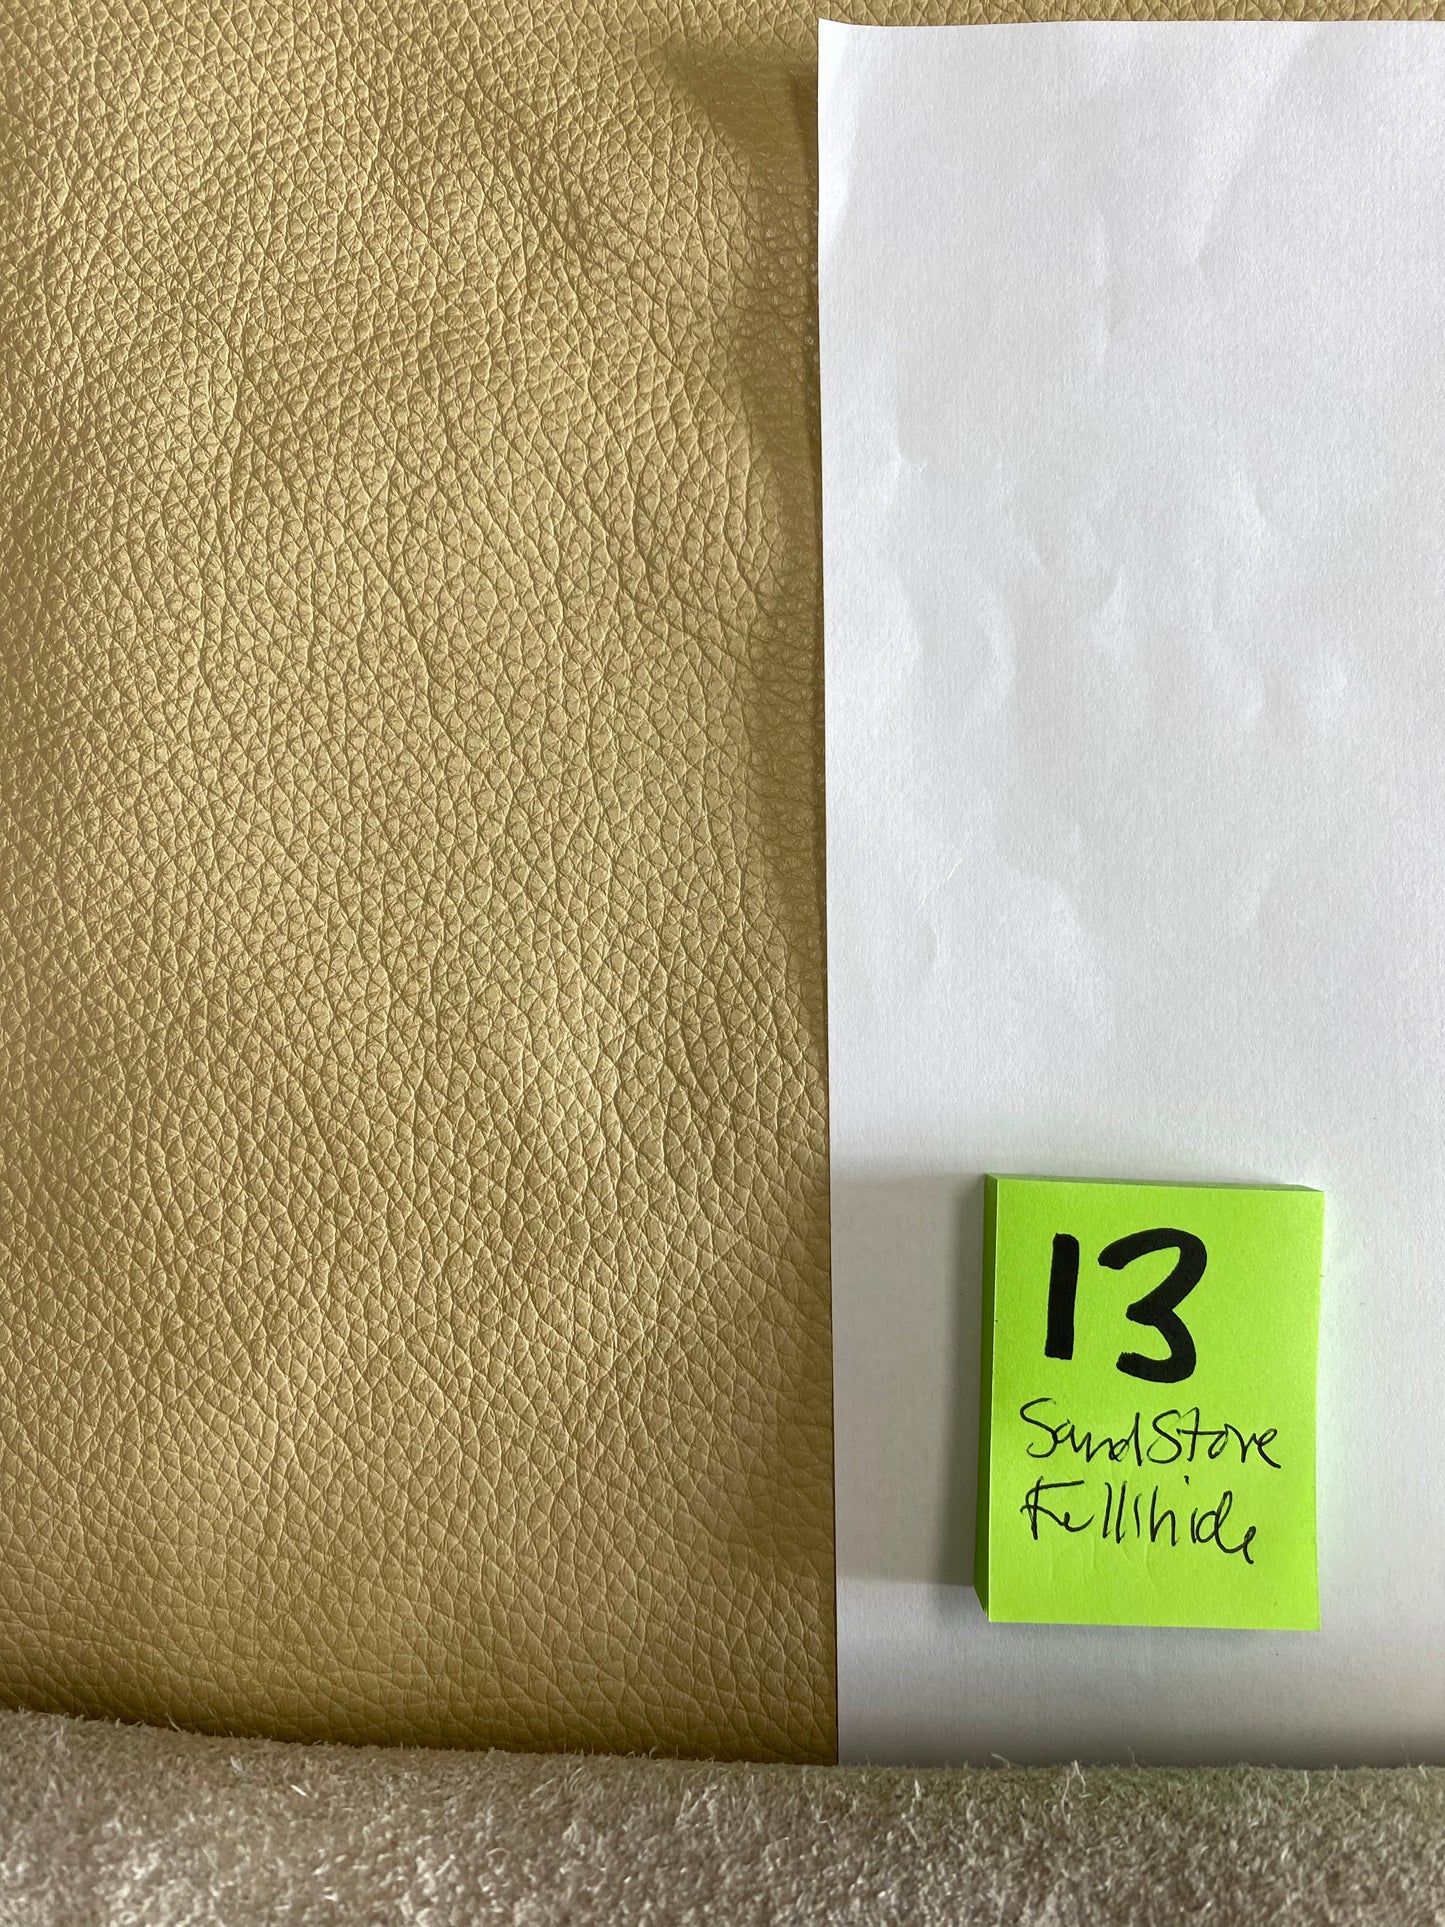 Leather Sandstone whole hide Full hide 1-1.2mm  Leather#13  - USA Shipping Included in Price!